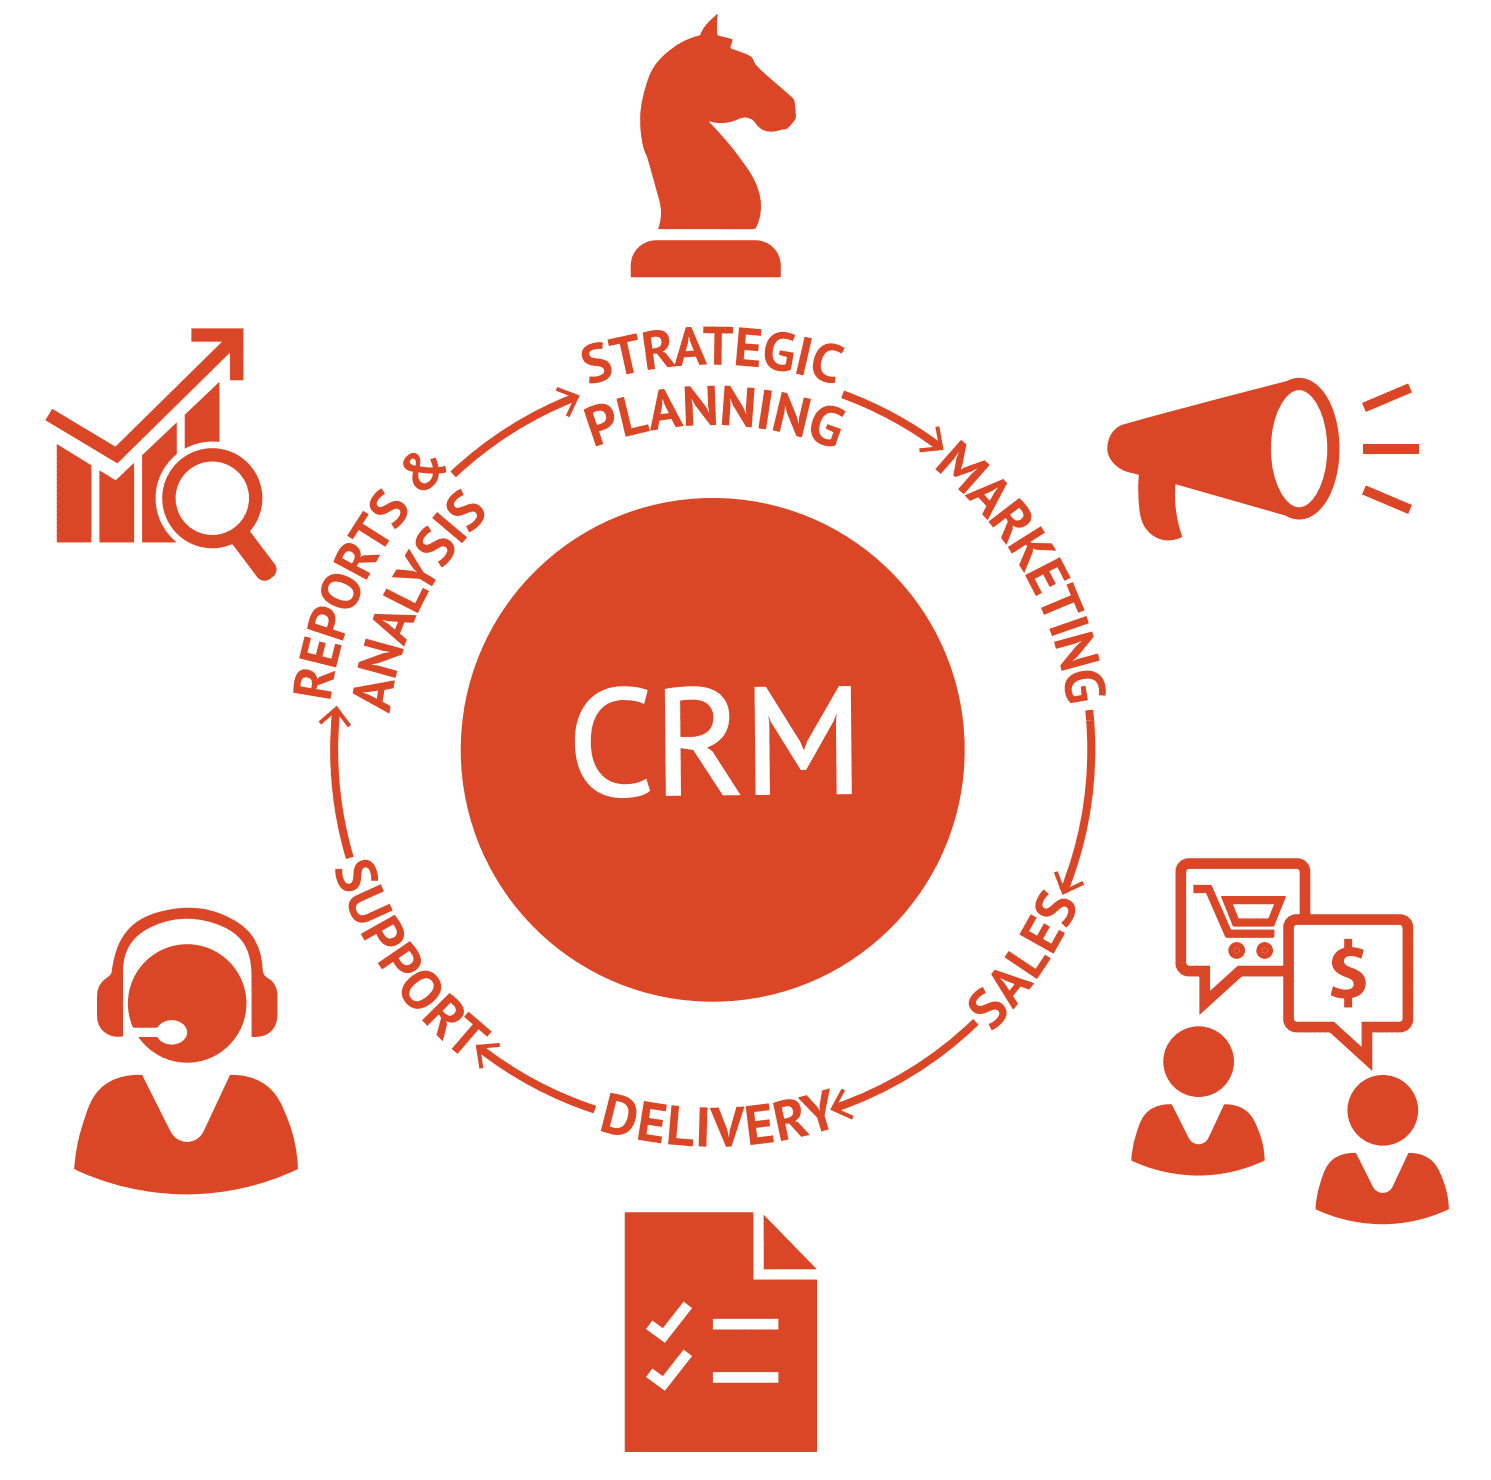 How to Implement CRM in a Law Firm Setting